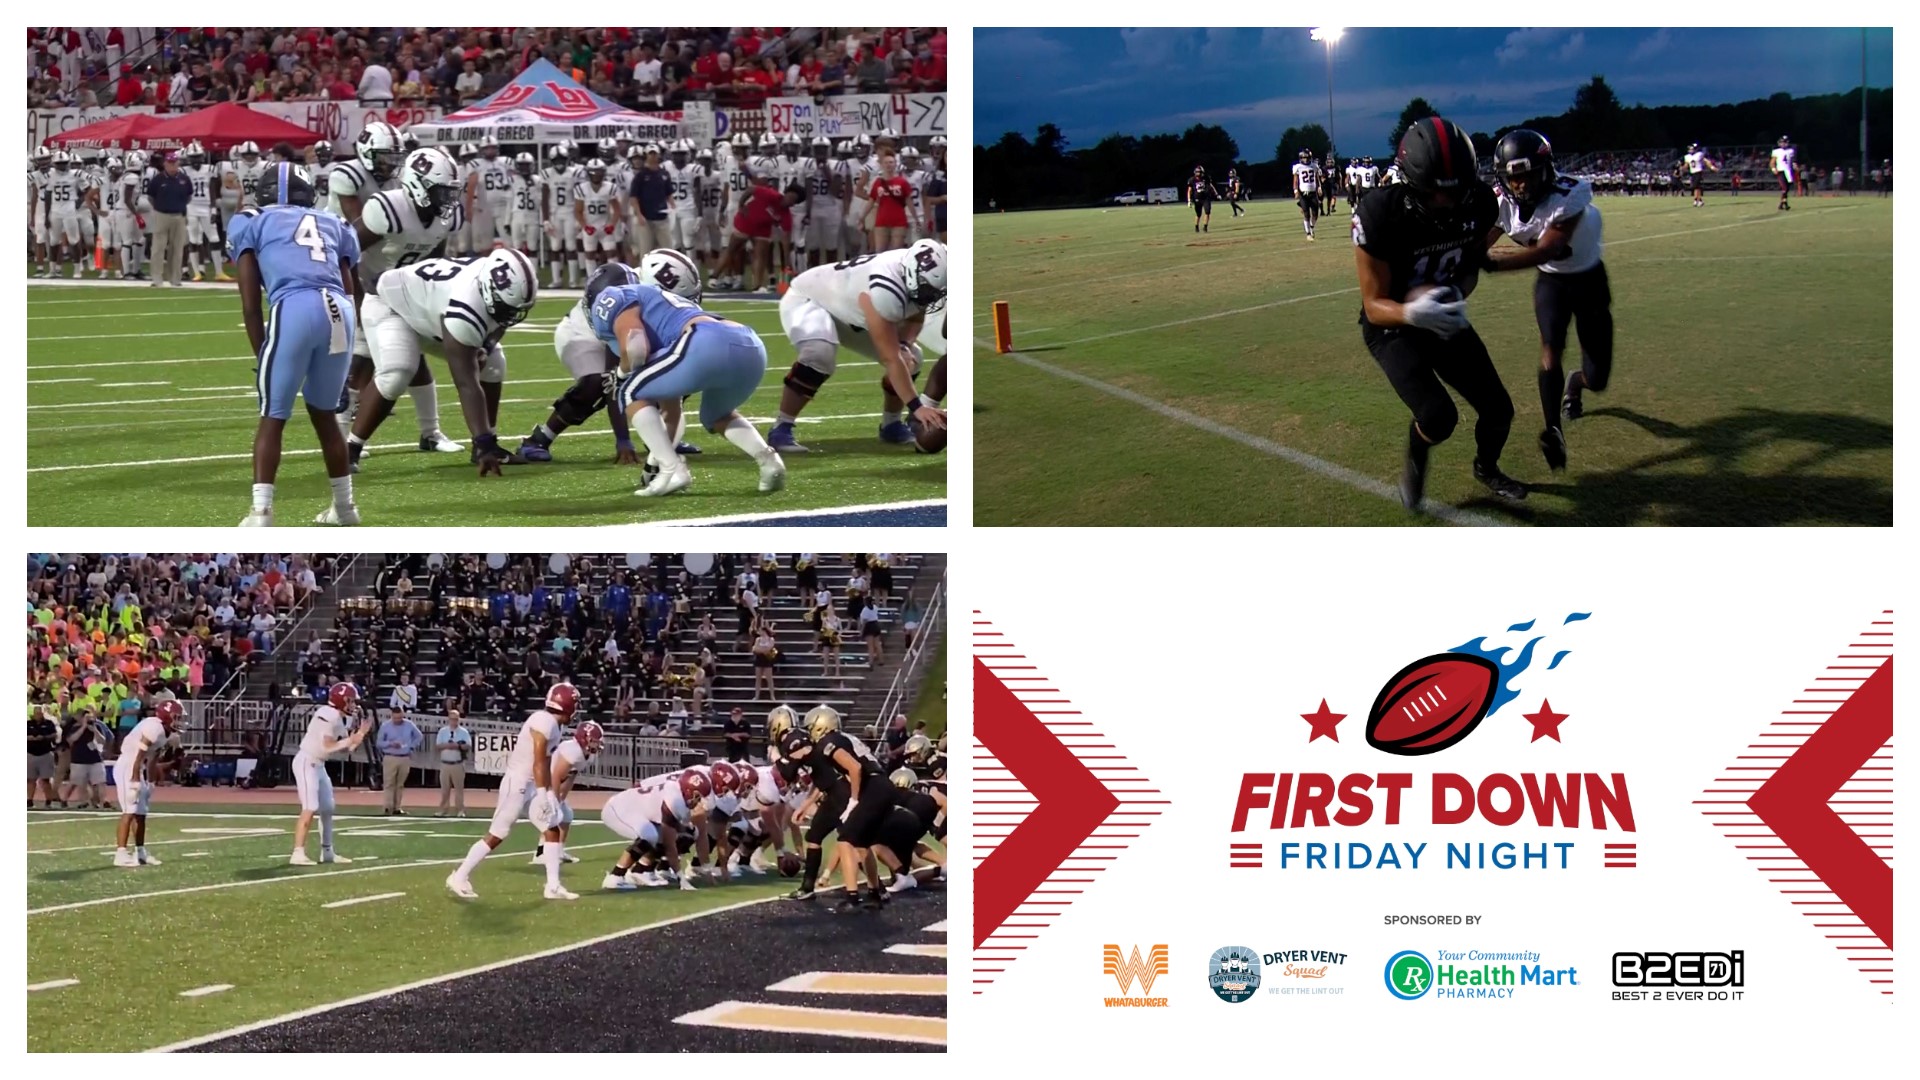 Region play began for many of our local teams during week 2. We also featured several rivalry games on the latest edition of First Down Friday Night